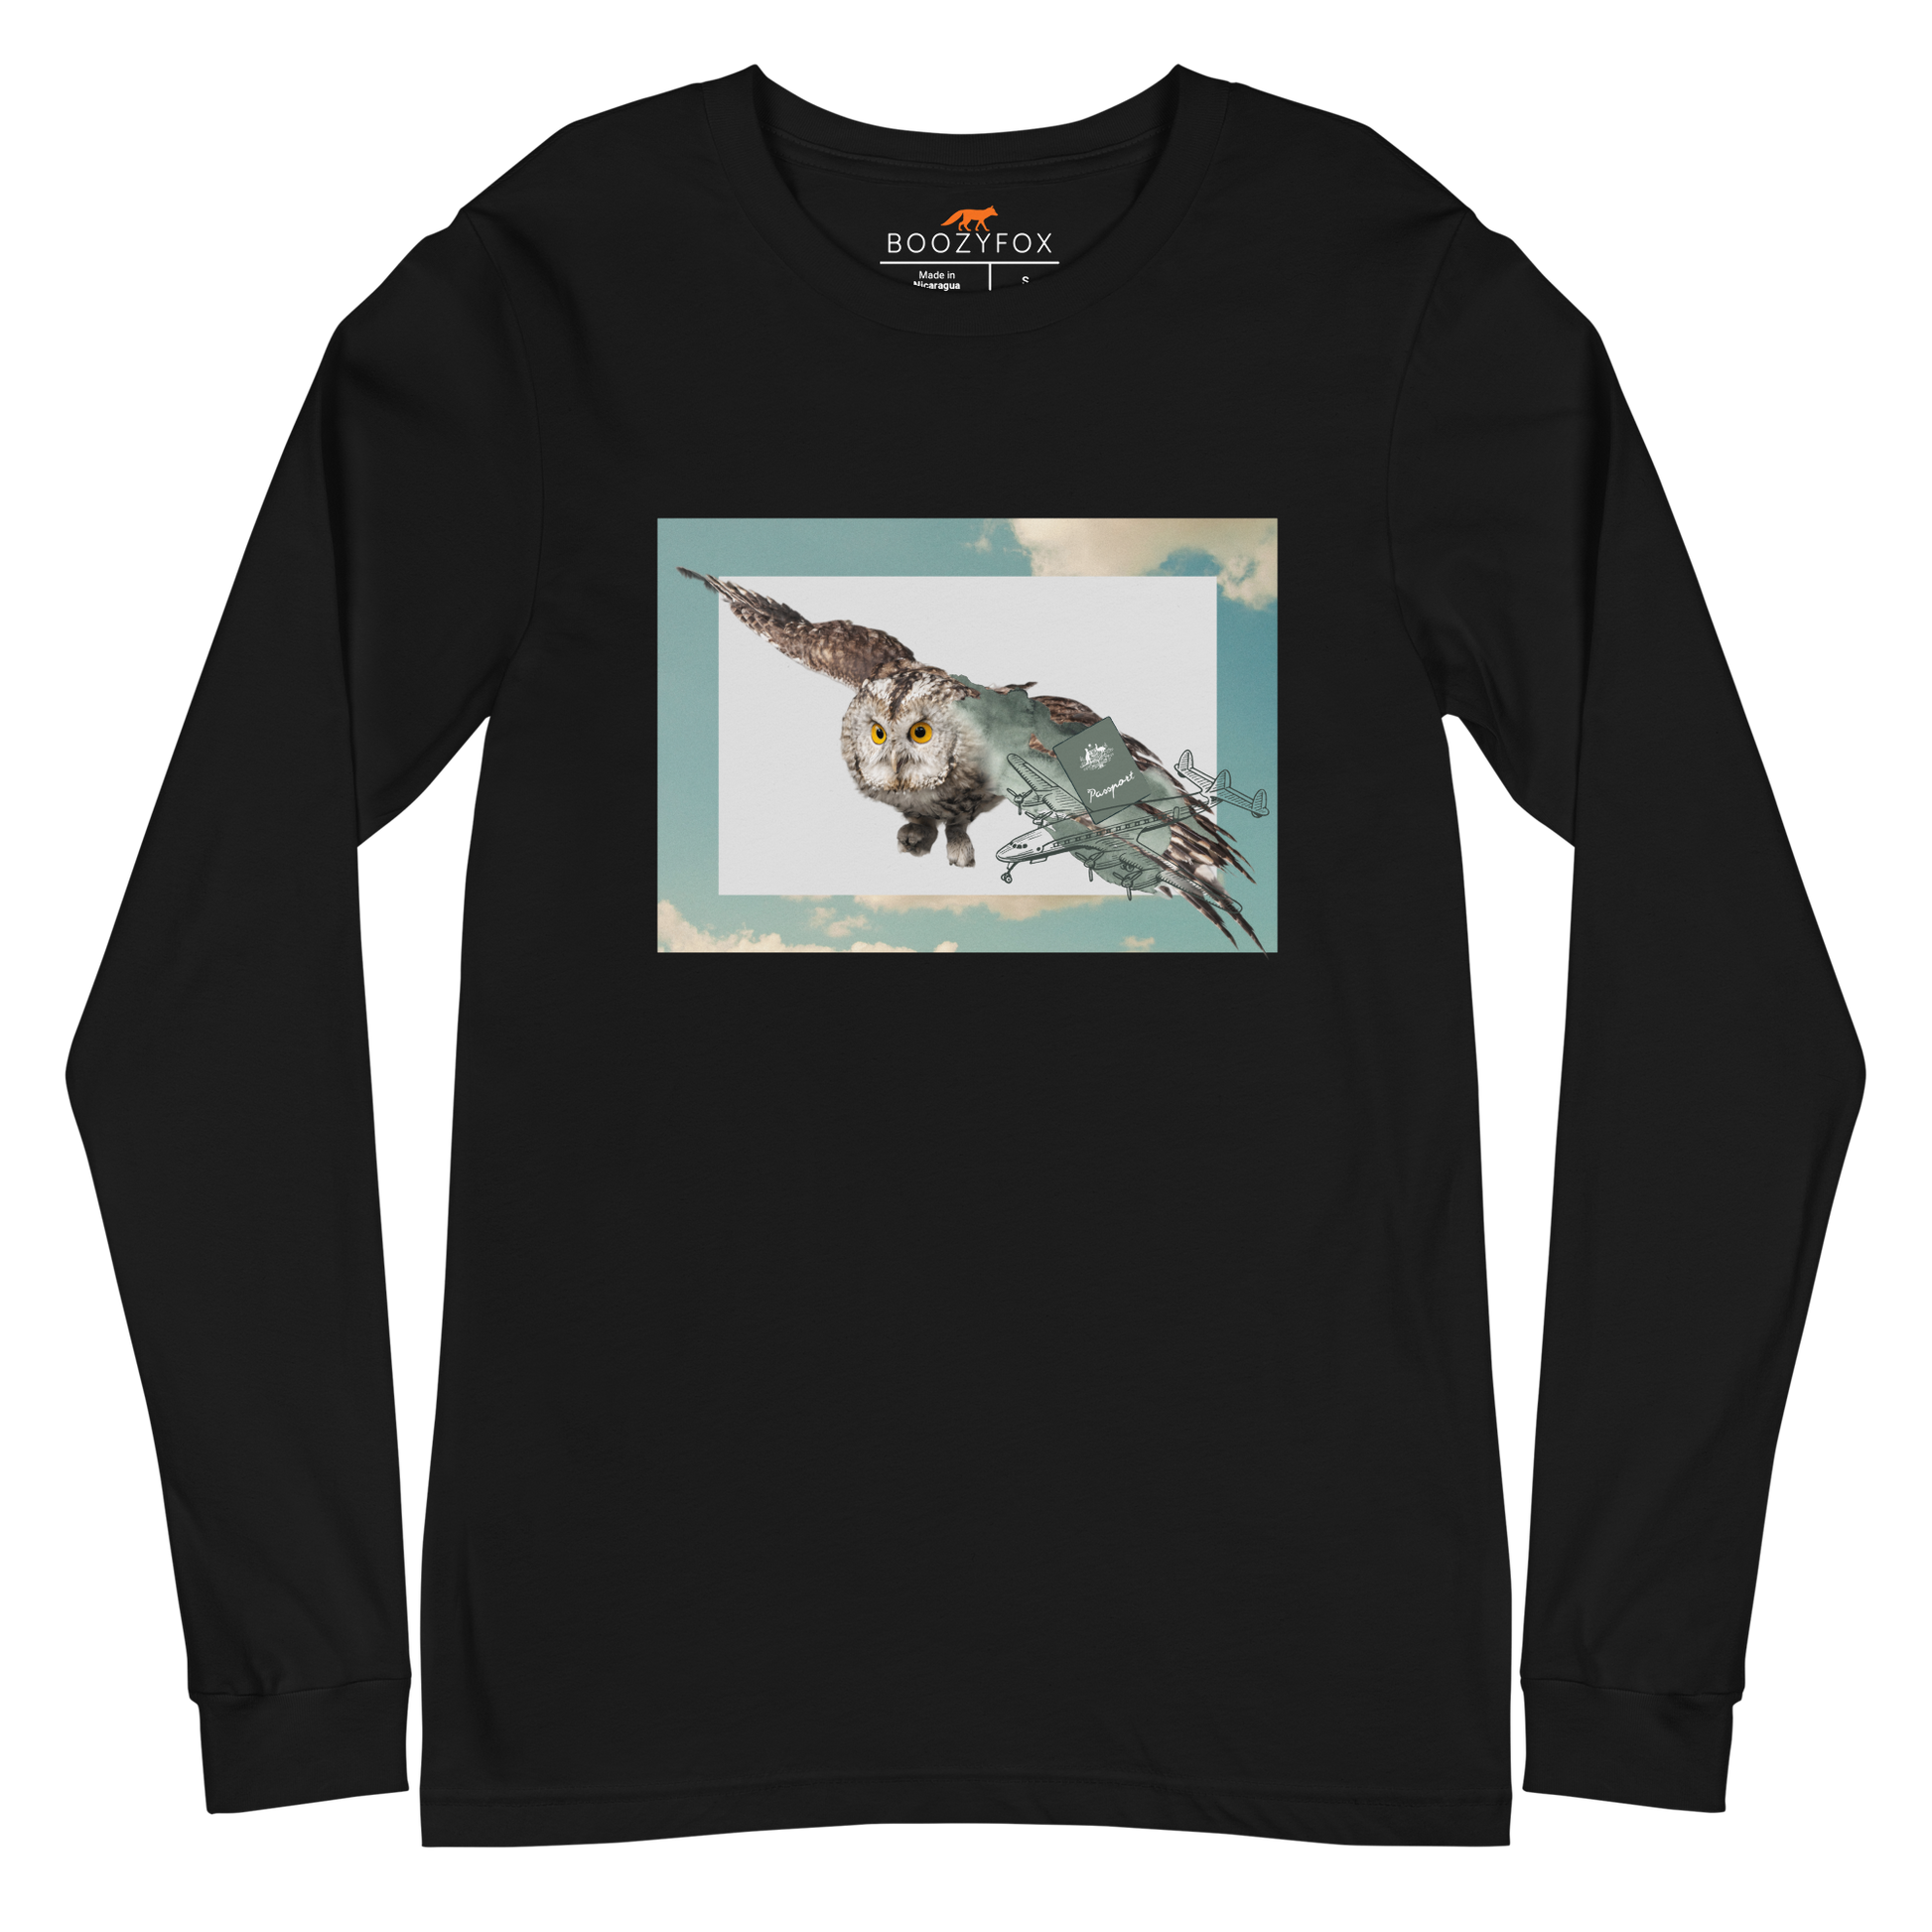 Black Owl Long Sleeve Tee featuring a majestic Flying Owl graphic on the chest - Cool Owl Long Sleeve Graphic Tees - Boozy Fox